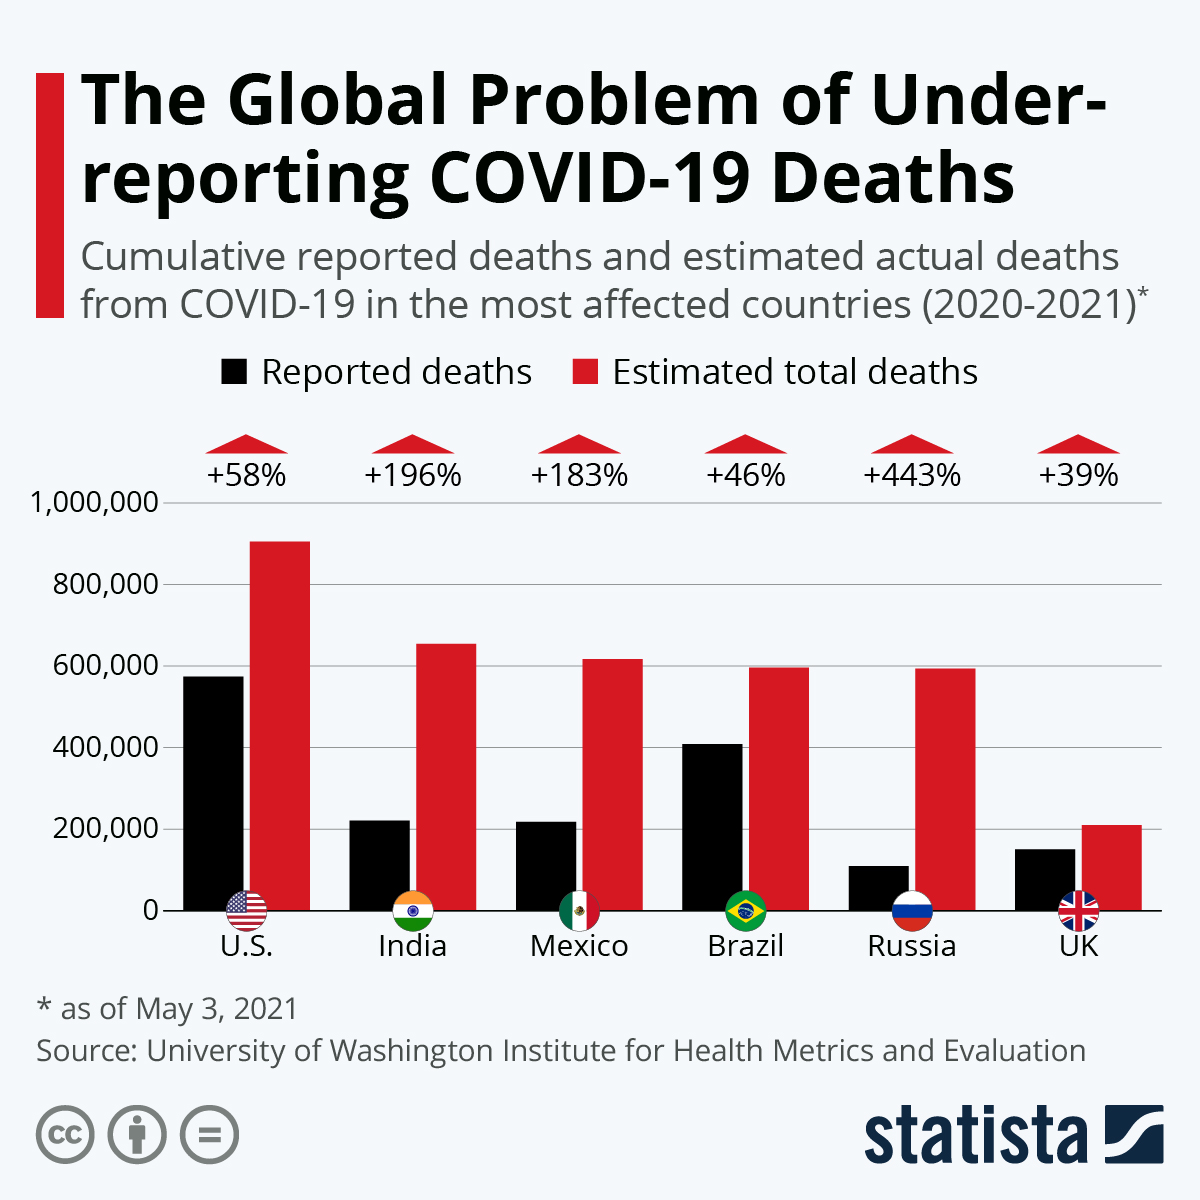 The Global Problem of Underreporting COVID-19 Deaths